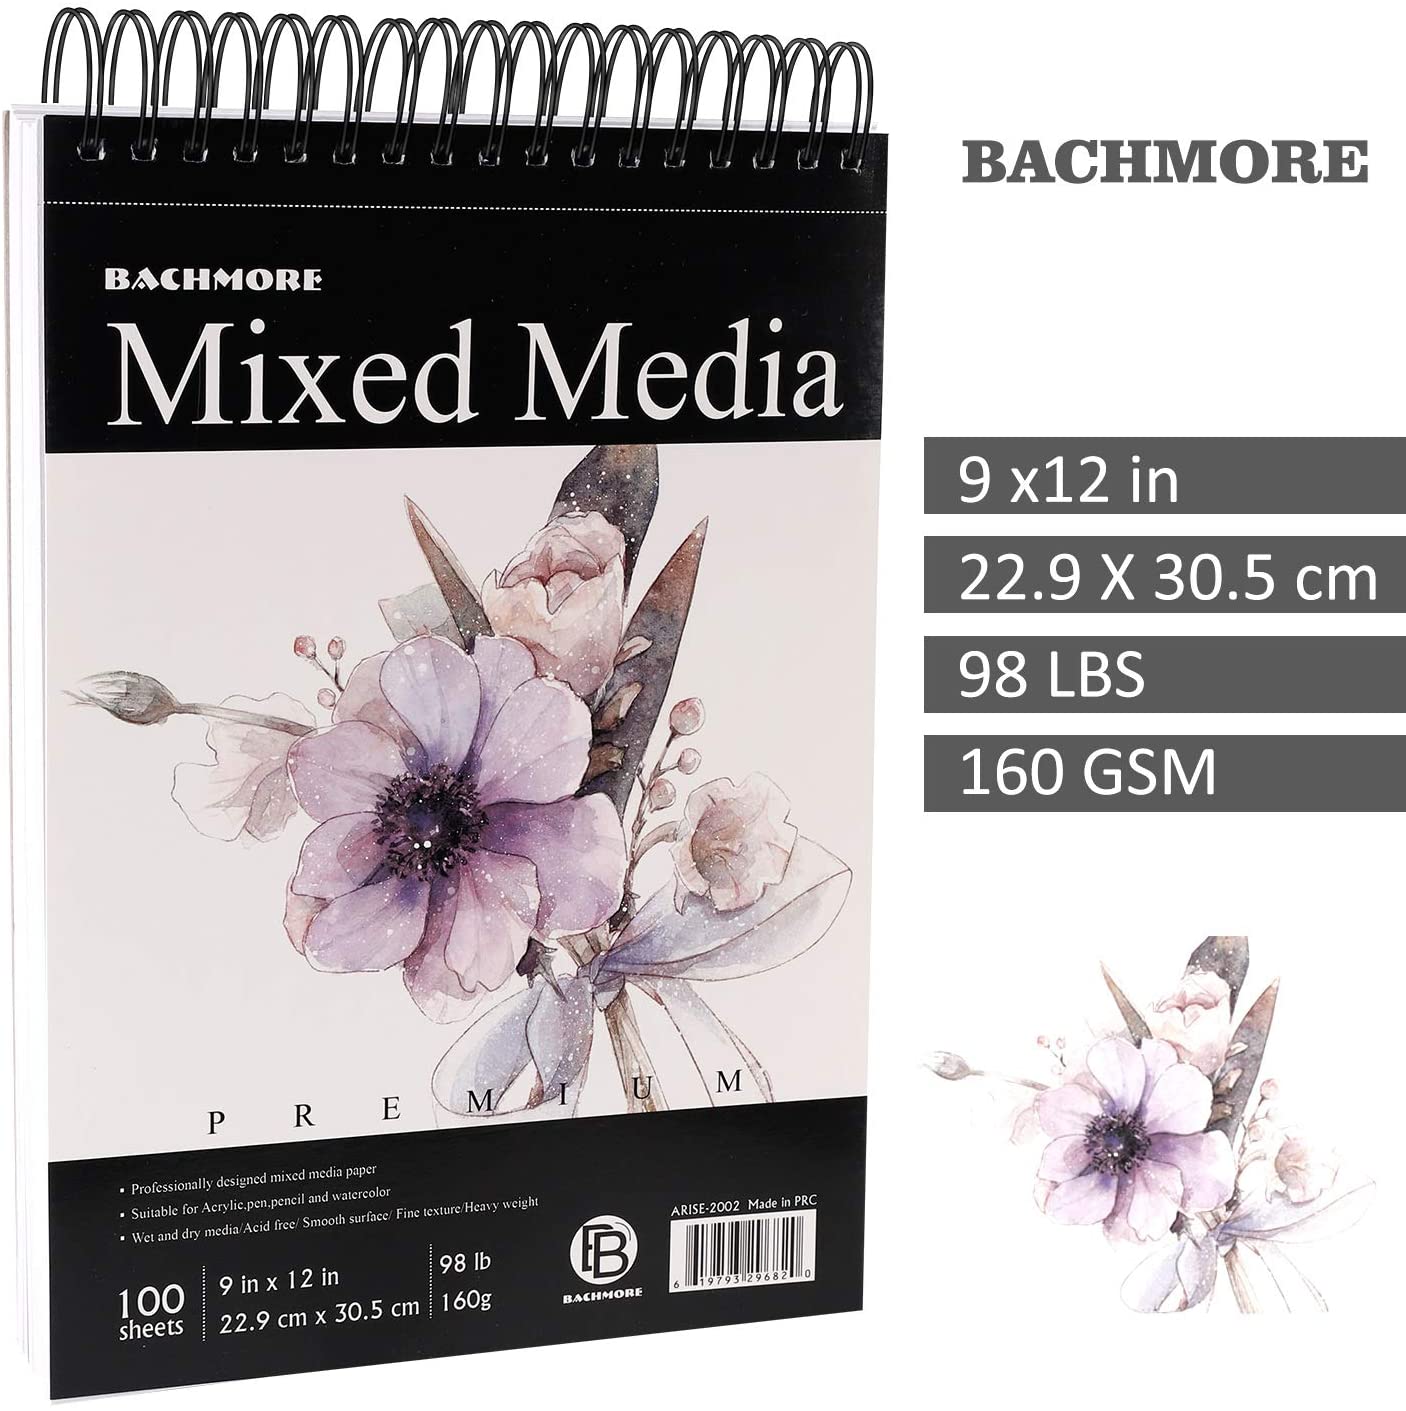 Bachmore Sketchpad 100 Sheet features